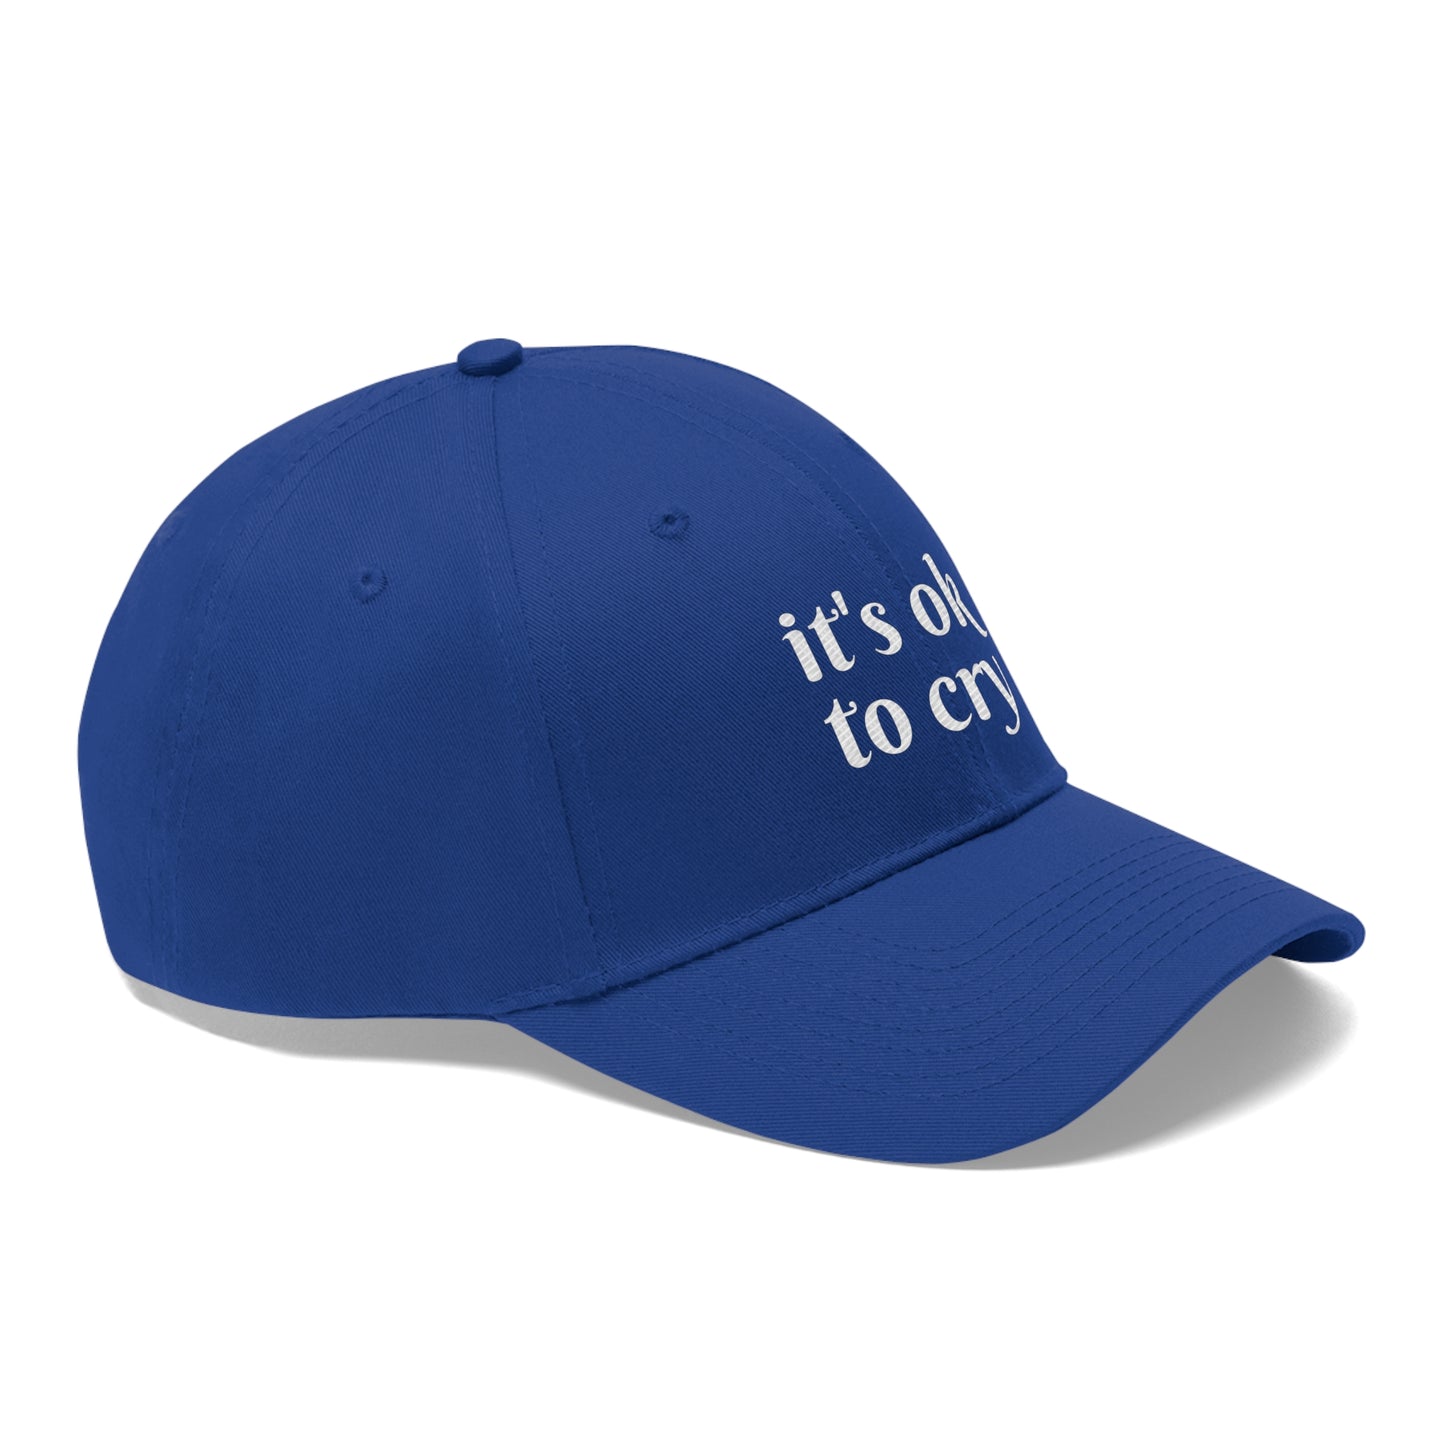 Embrace Your Emotions" Embroidered Hat - "It's Okay to Cry"